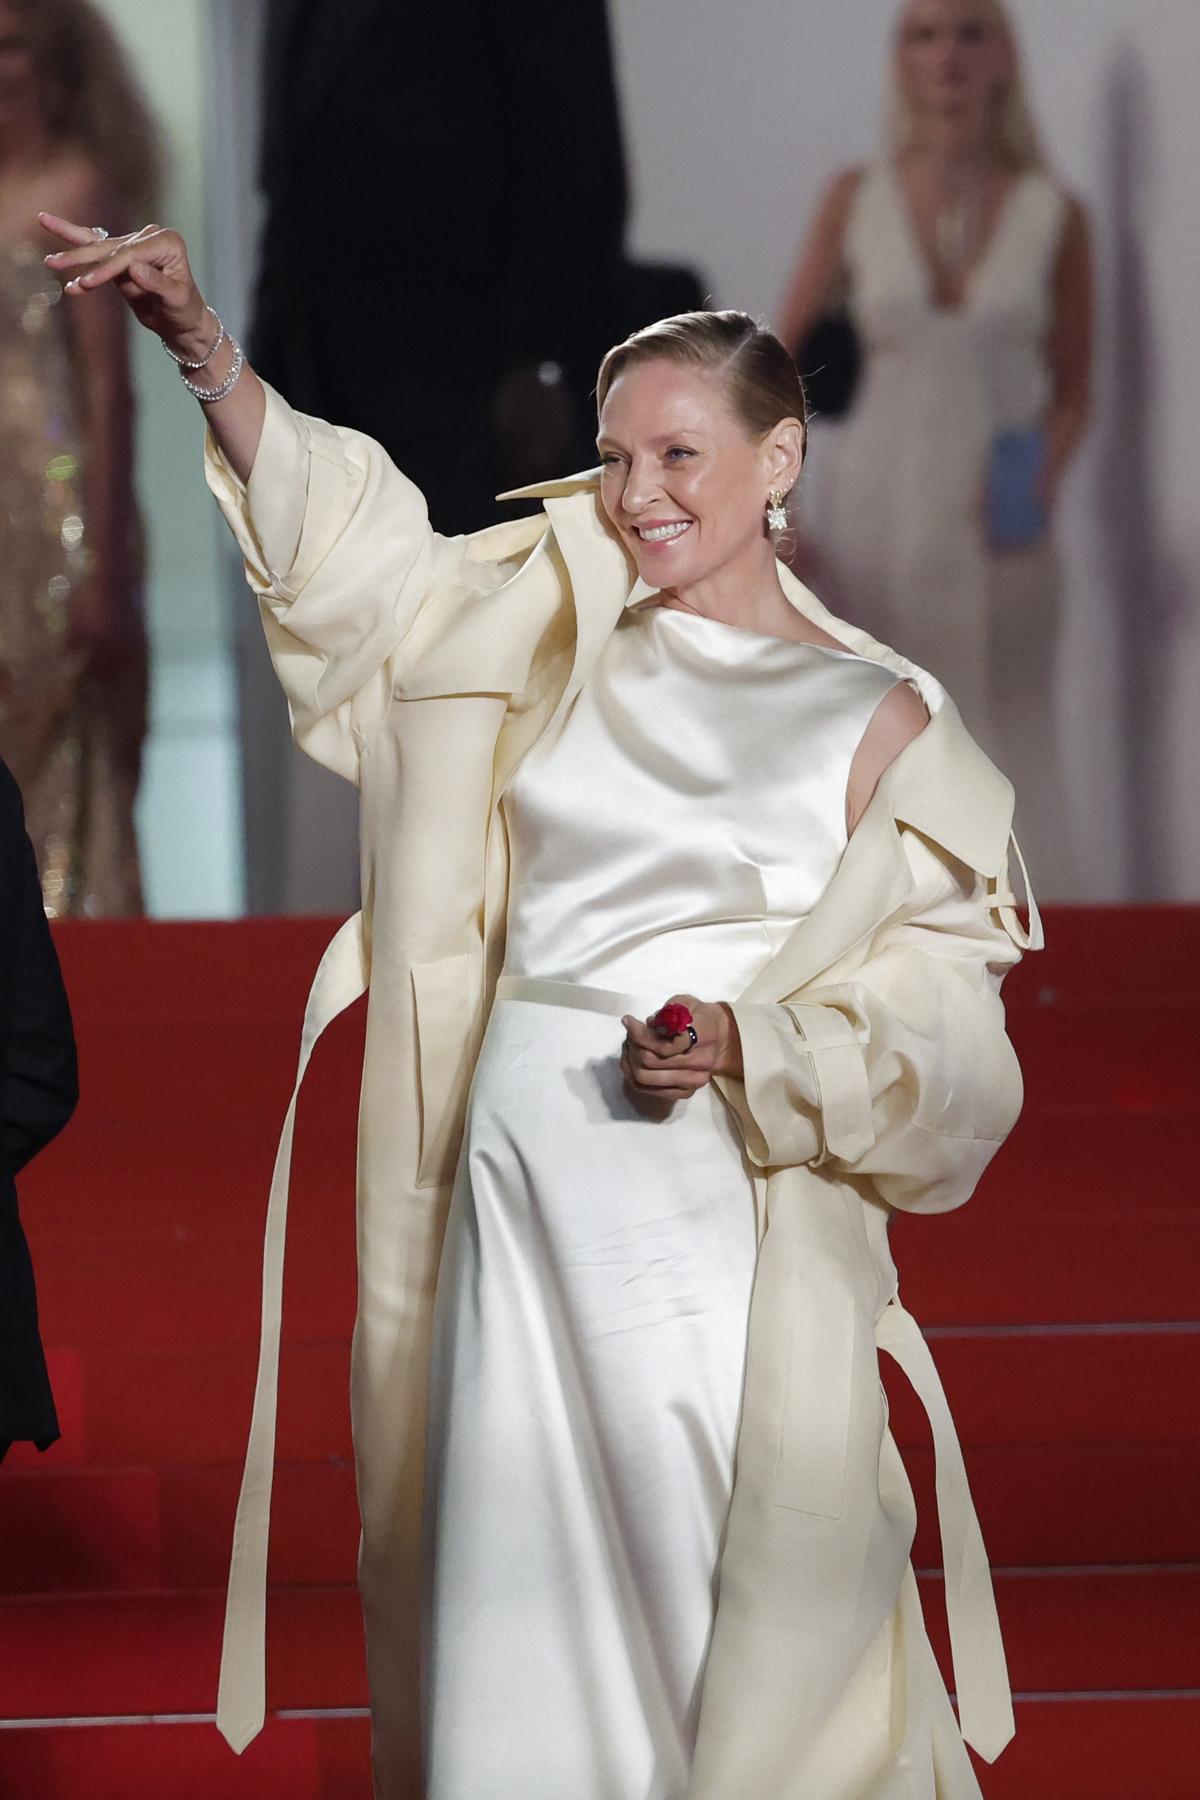  Uma Thurman poses on the red carpet during arrivals for the screening of the film “Oh Canada” in competition at the 77th Cannes Film Festival in Cannes, France, May 17, 2024.